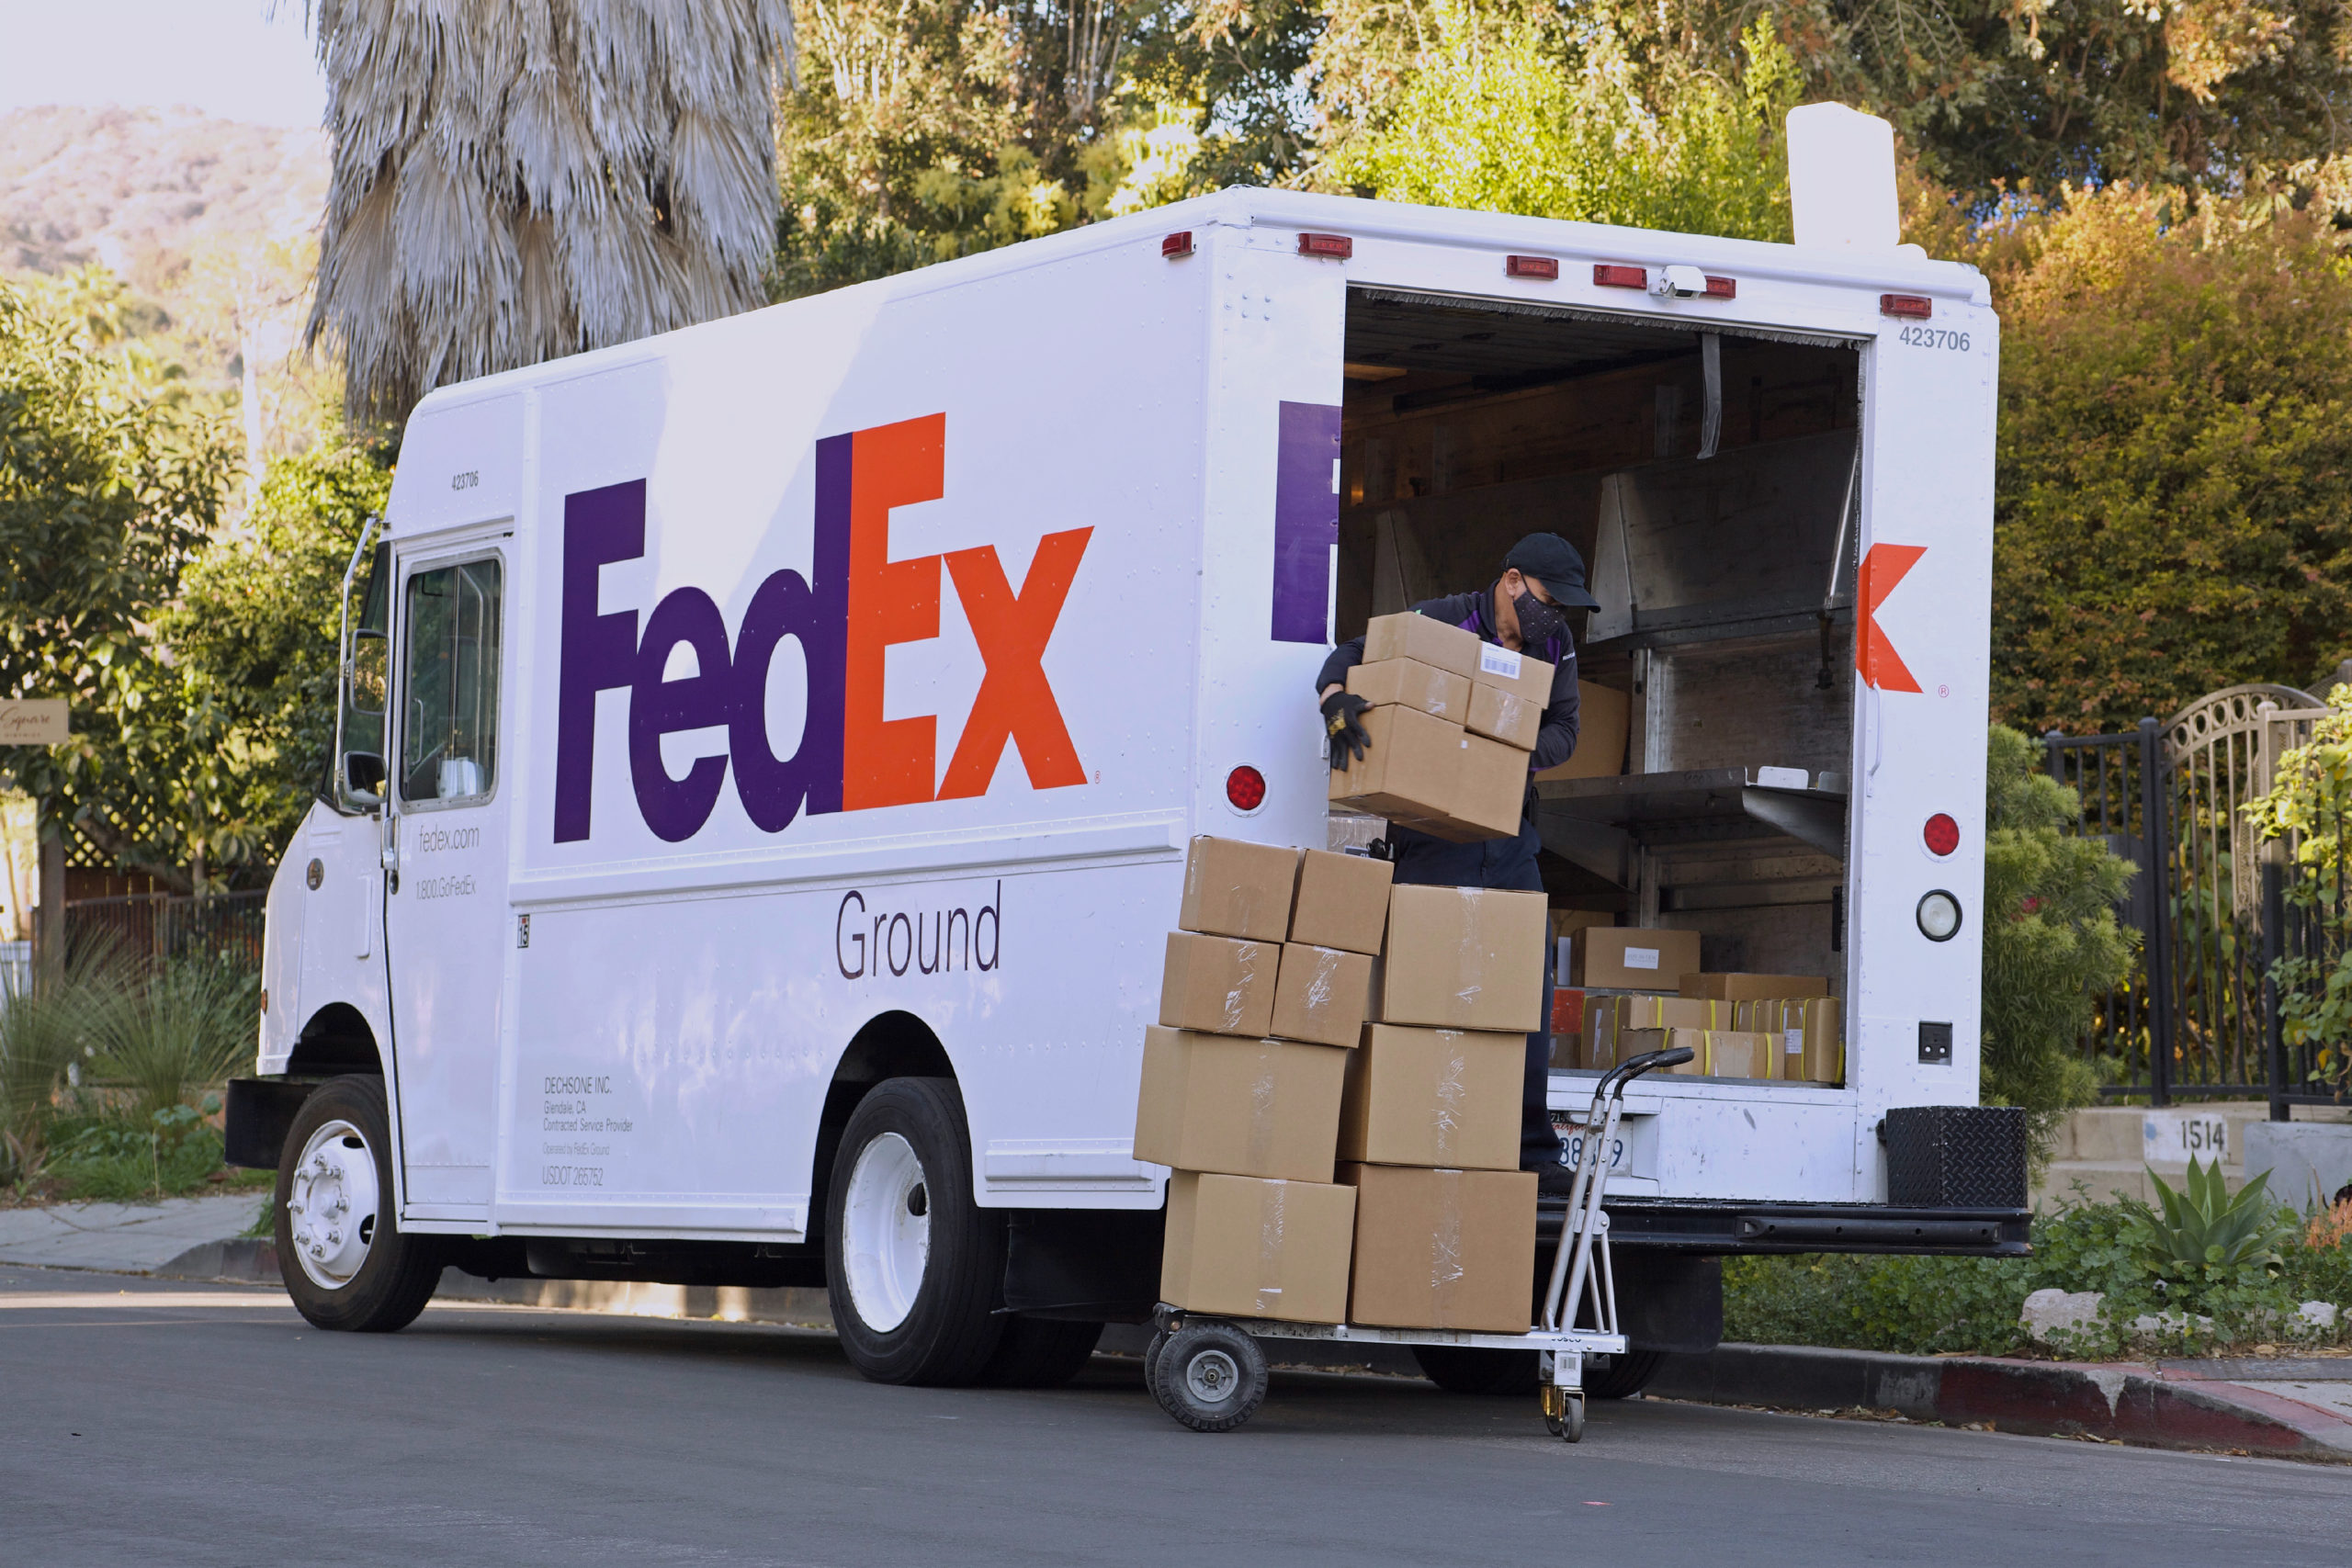 Picture proof FedEx delivery coming to U.S. ChannelX